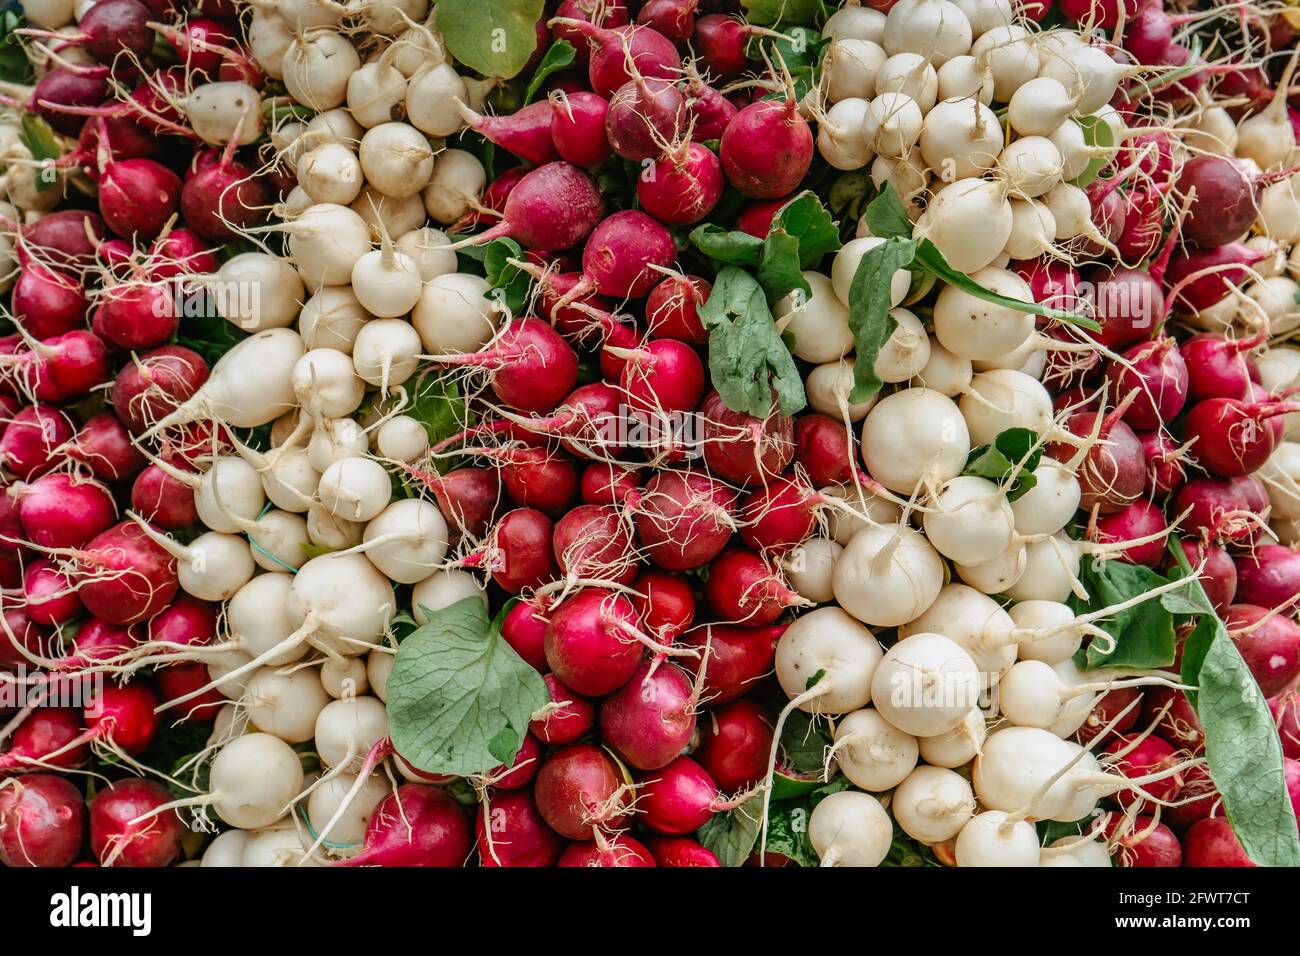 Detail of fresh white and red radish in farmers market.Edible root vegetable. Healthy diet eating. Group of crunchy ripe radishes.Source of vitamin B6 Stock Photo